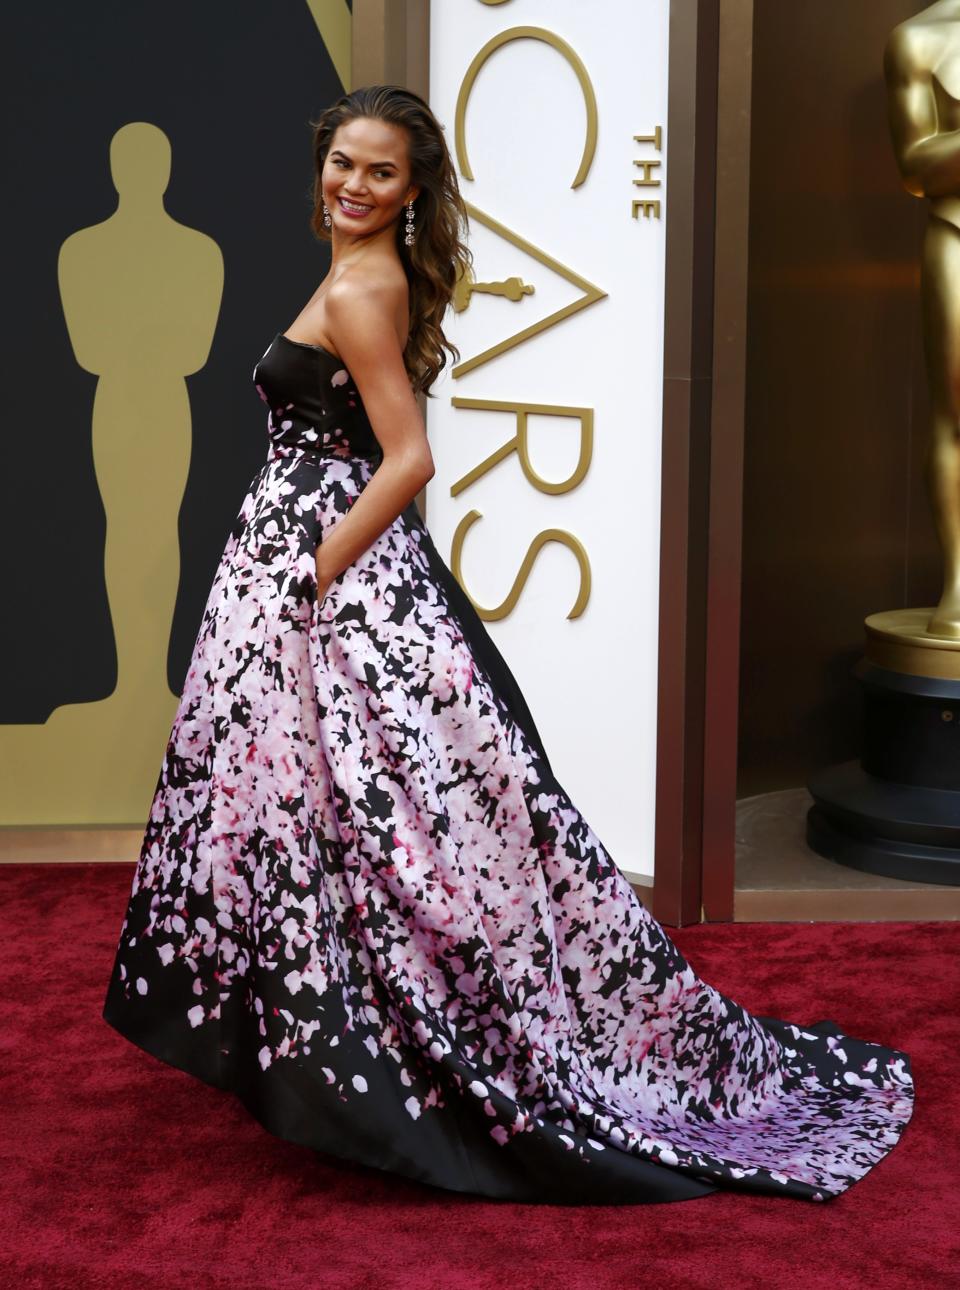 Model Chrissy Teigen poses on the red carpet as she arrives at the 86th Academy Awards in Hollywood, California March 2, 2014. REUTERS/Lucas Jackson (UNITED STATES - Tags: ENTERTAINMENT) (OSCARS-ARRIVALS)